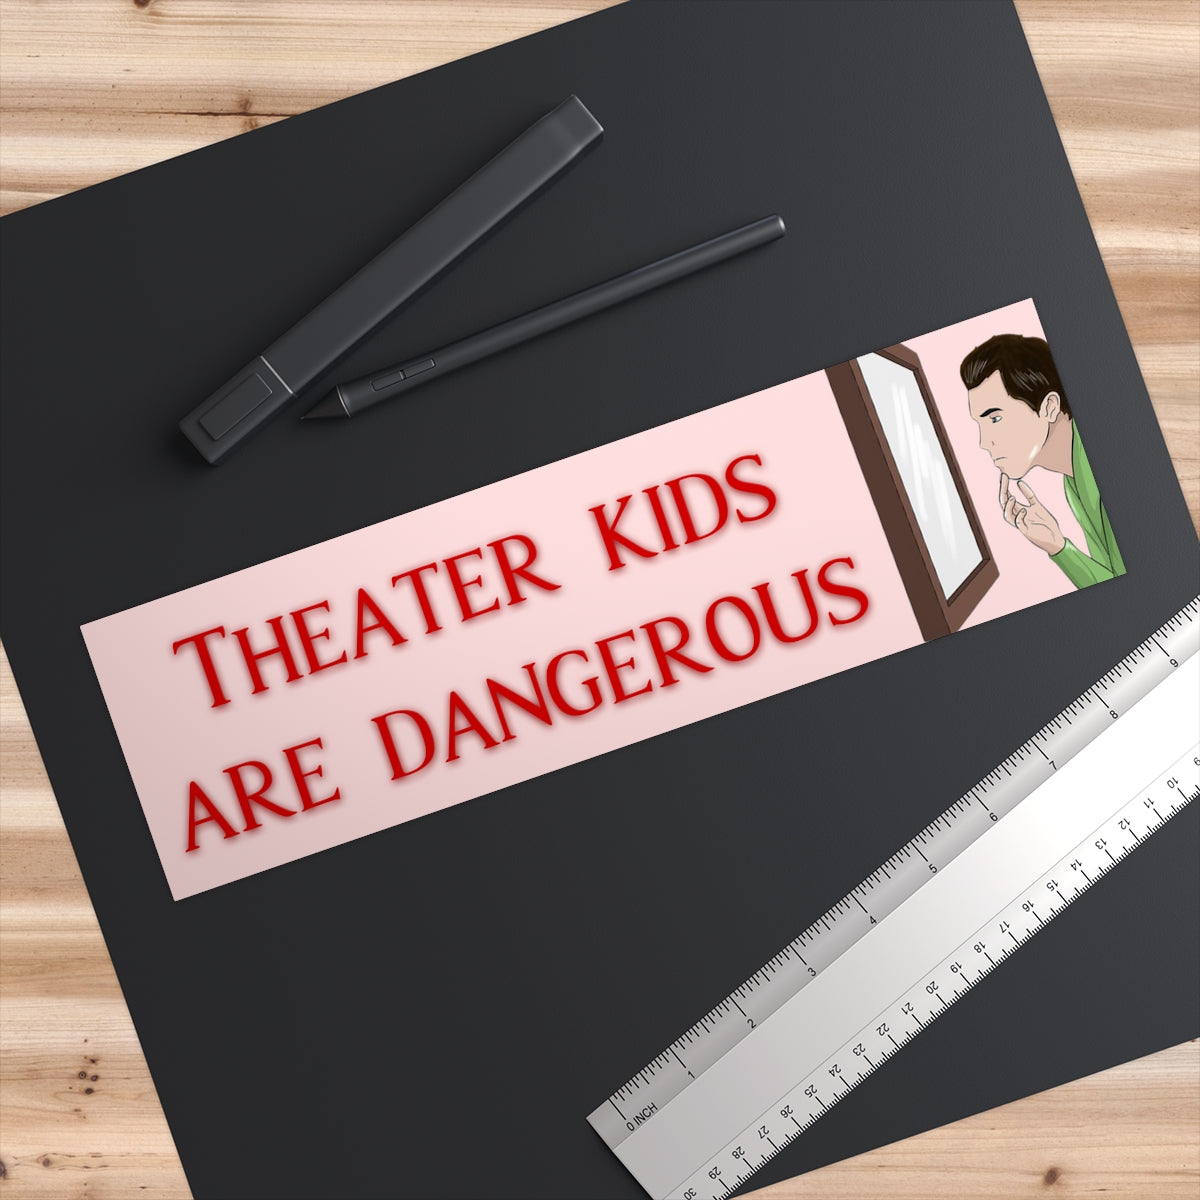 Theater kids are dangerous